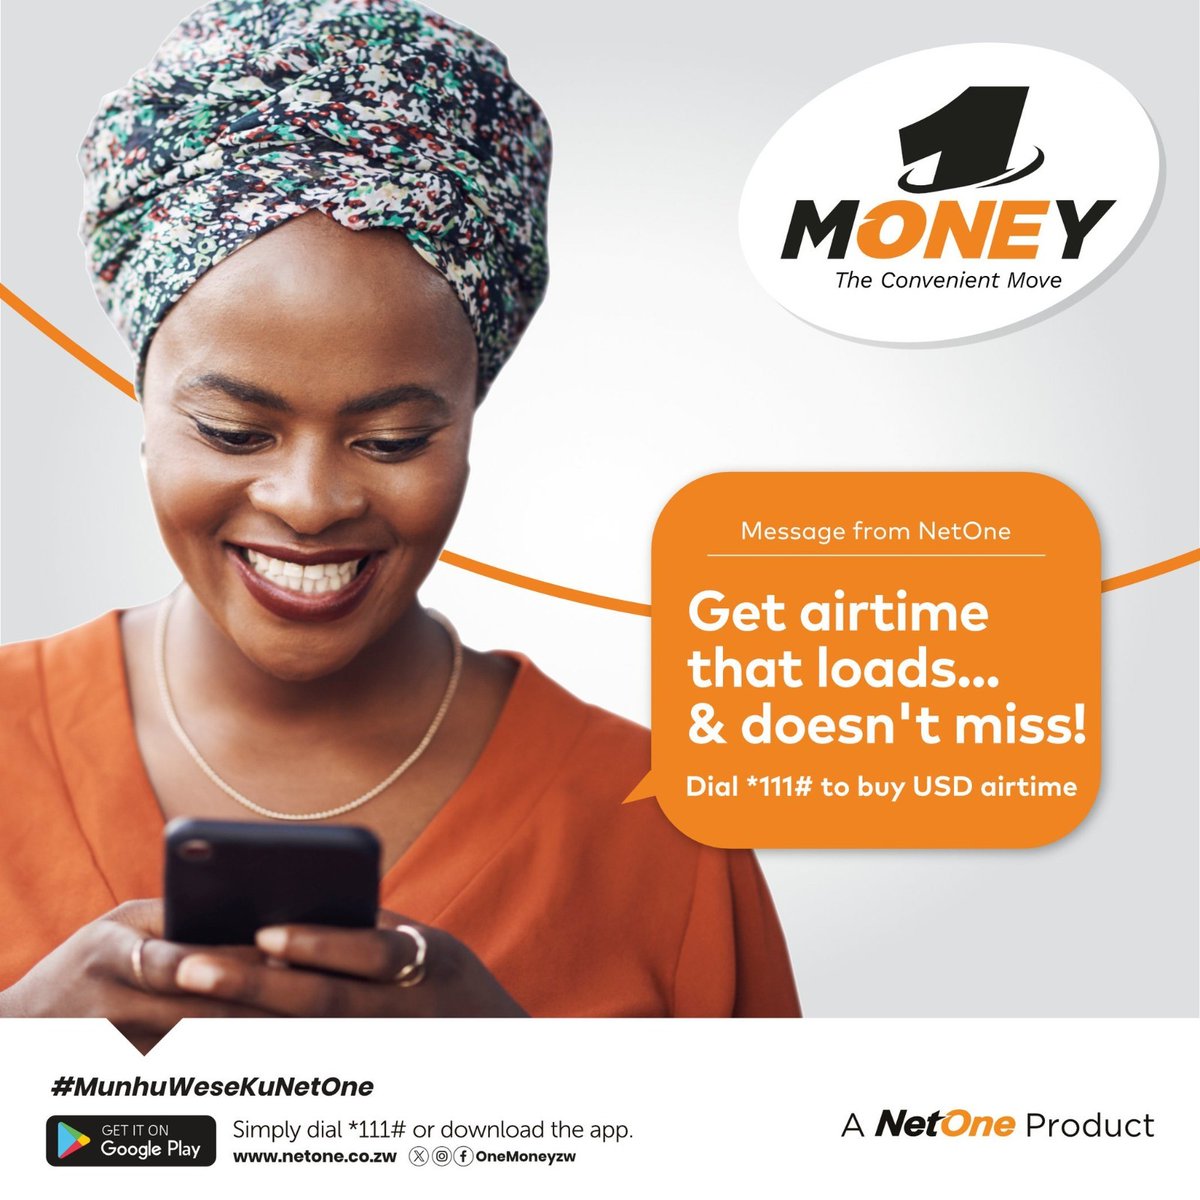 Never miss a beat with OneMoney! 📱💸 Get airtime that loads & doesn't miss. Dial *111# and enjoy hassle-free USD airtime top-ups wherever you are.